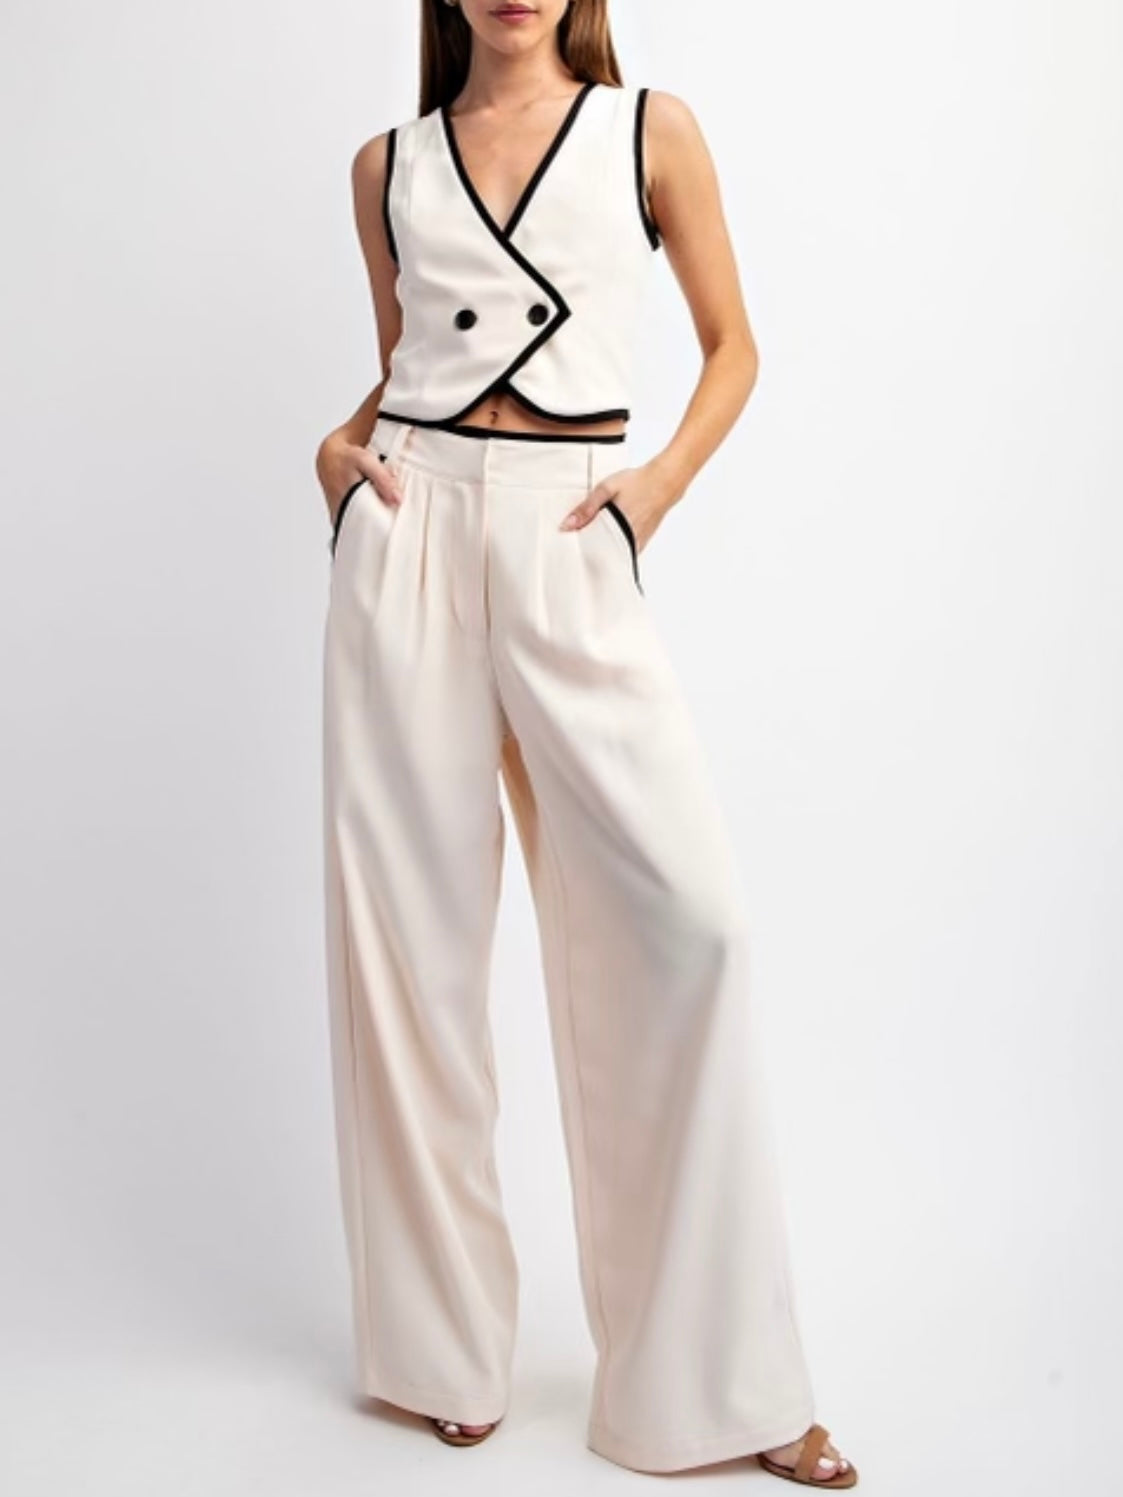 White and black contrast edge set of 2 vest top and pants